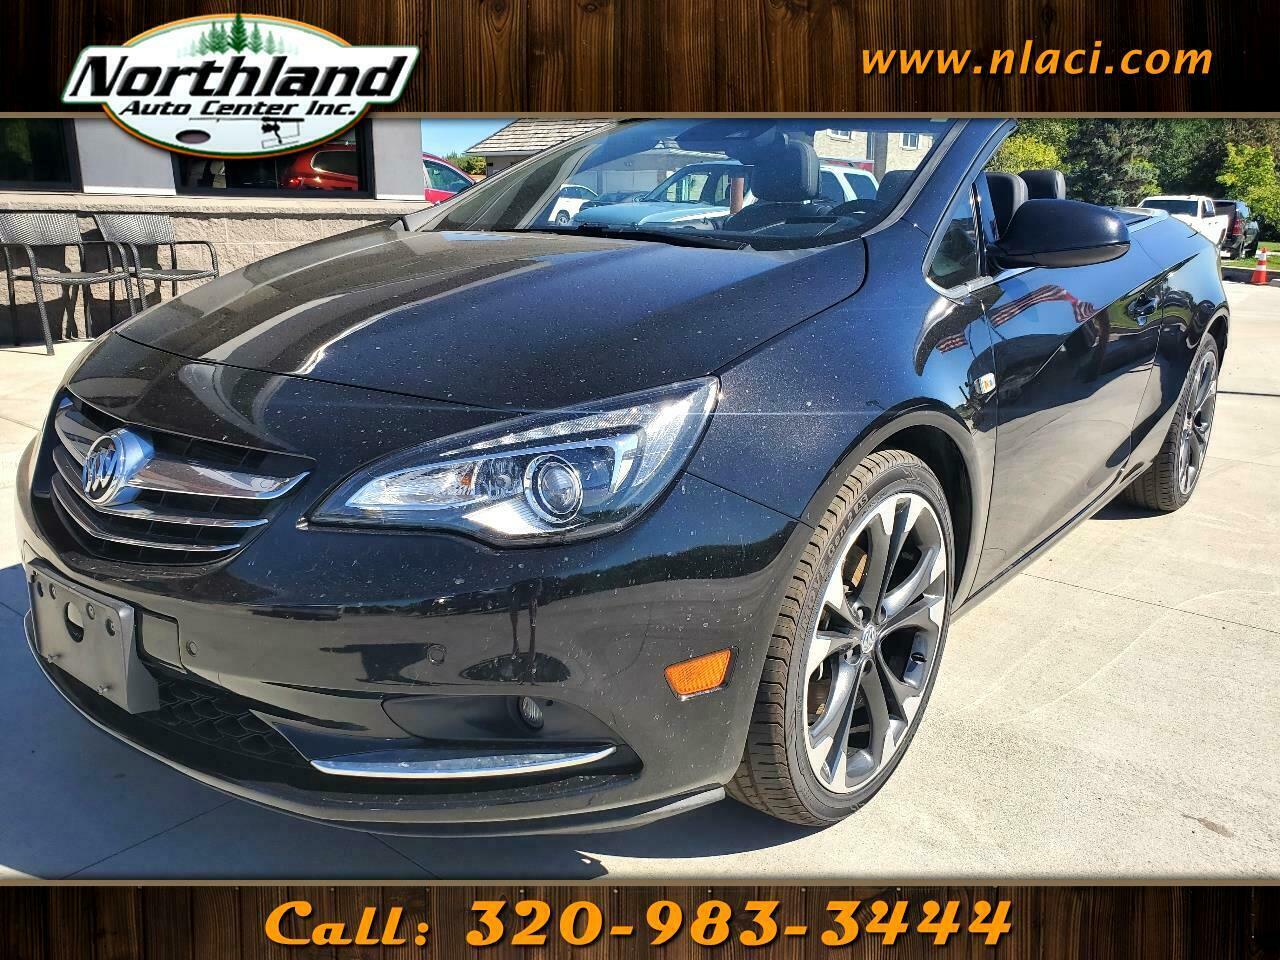 2018 Buick Cascada 2dr Conv Premium 2018 Buick Cascada, Charcoal With 43,340 Miles Available Now!